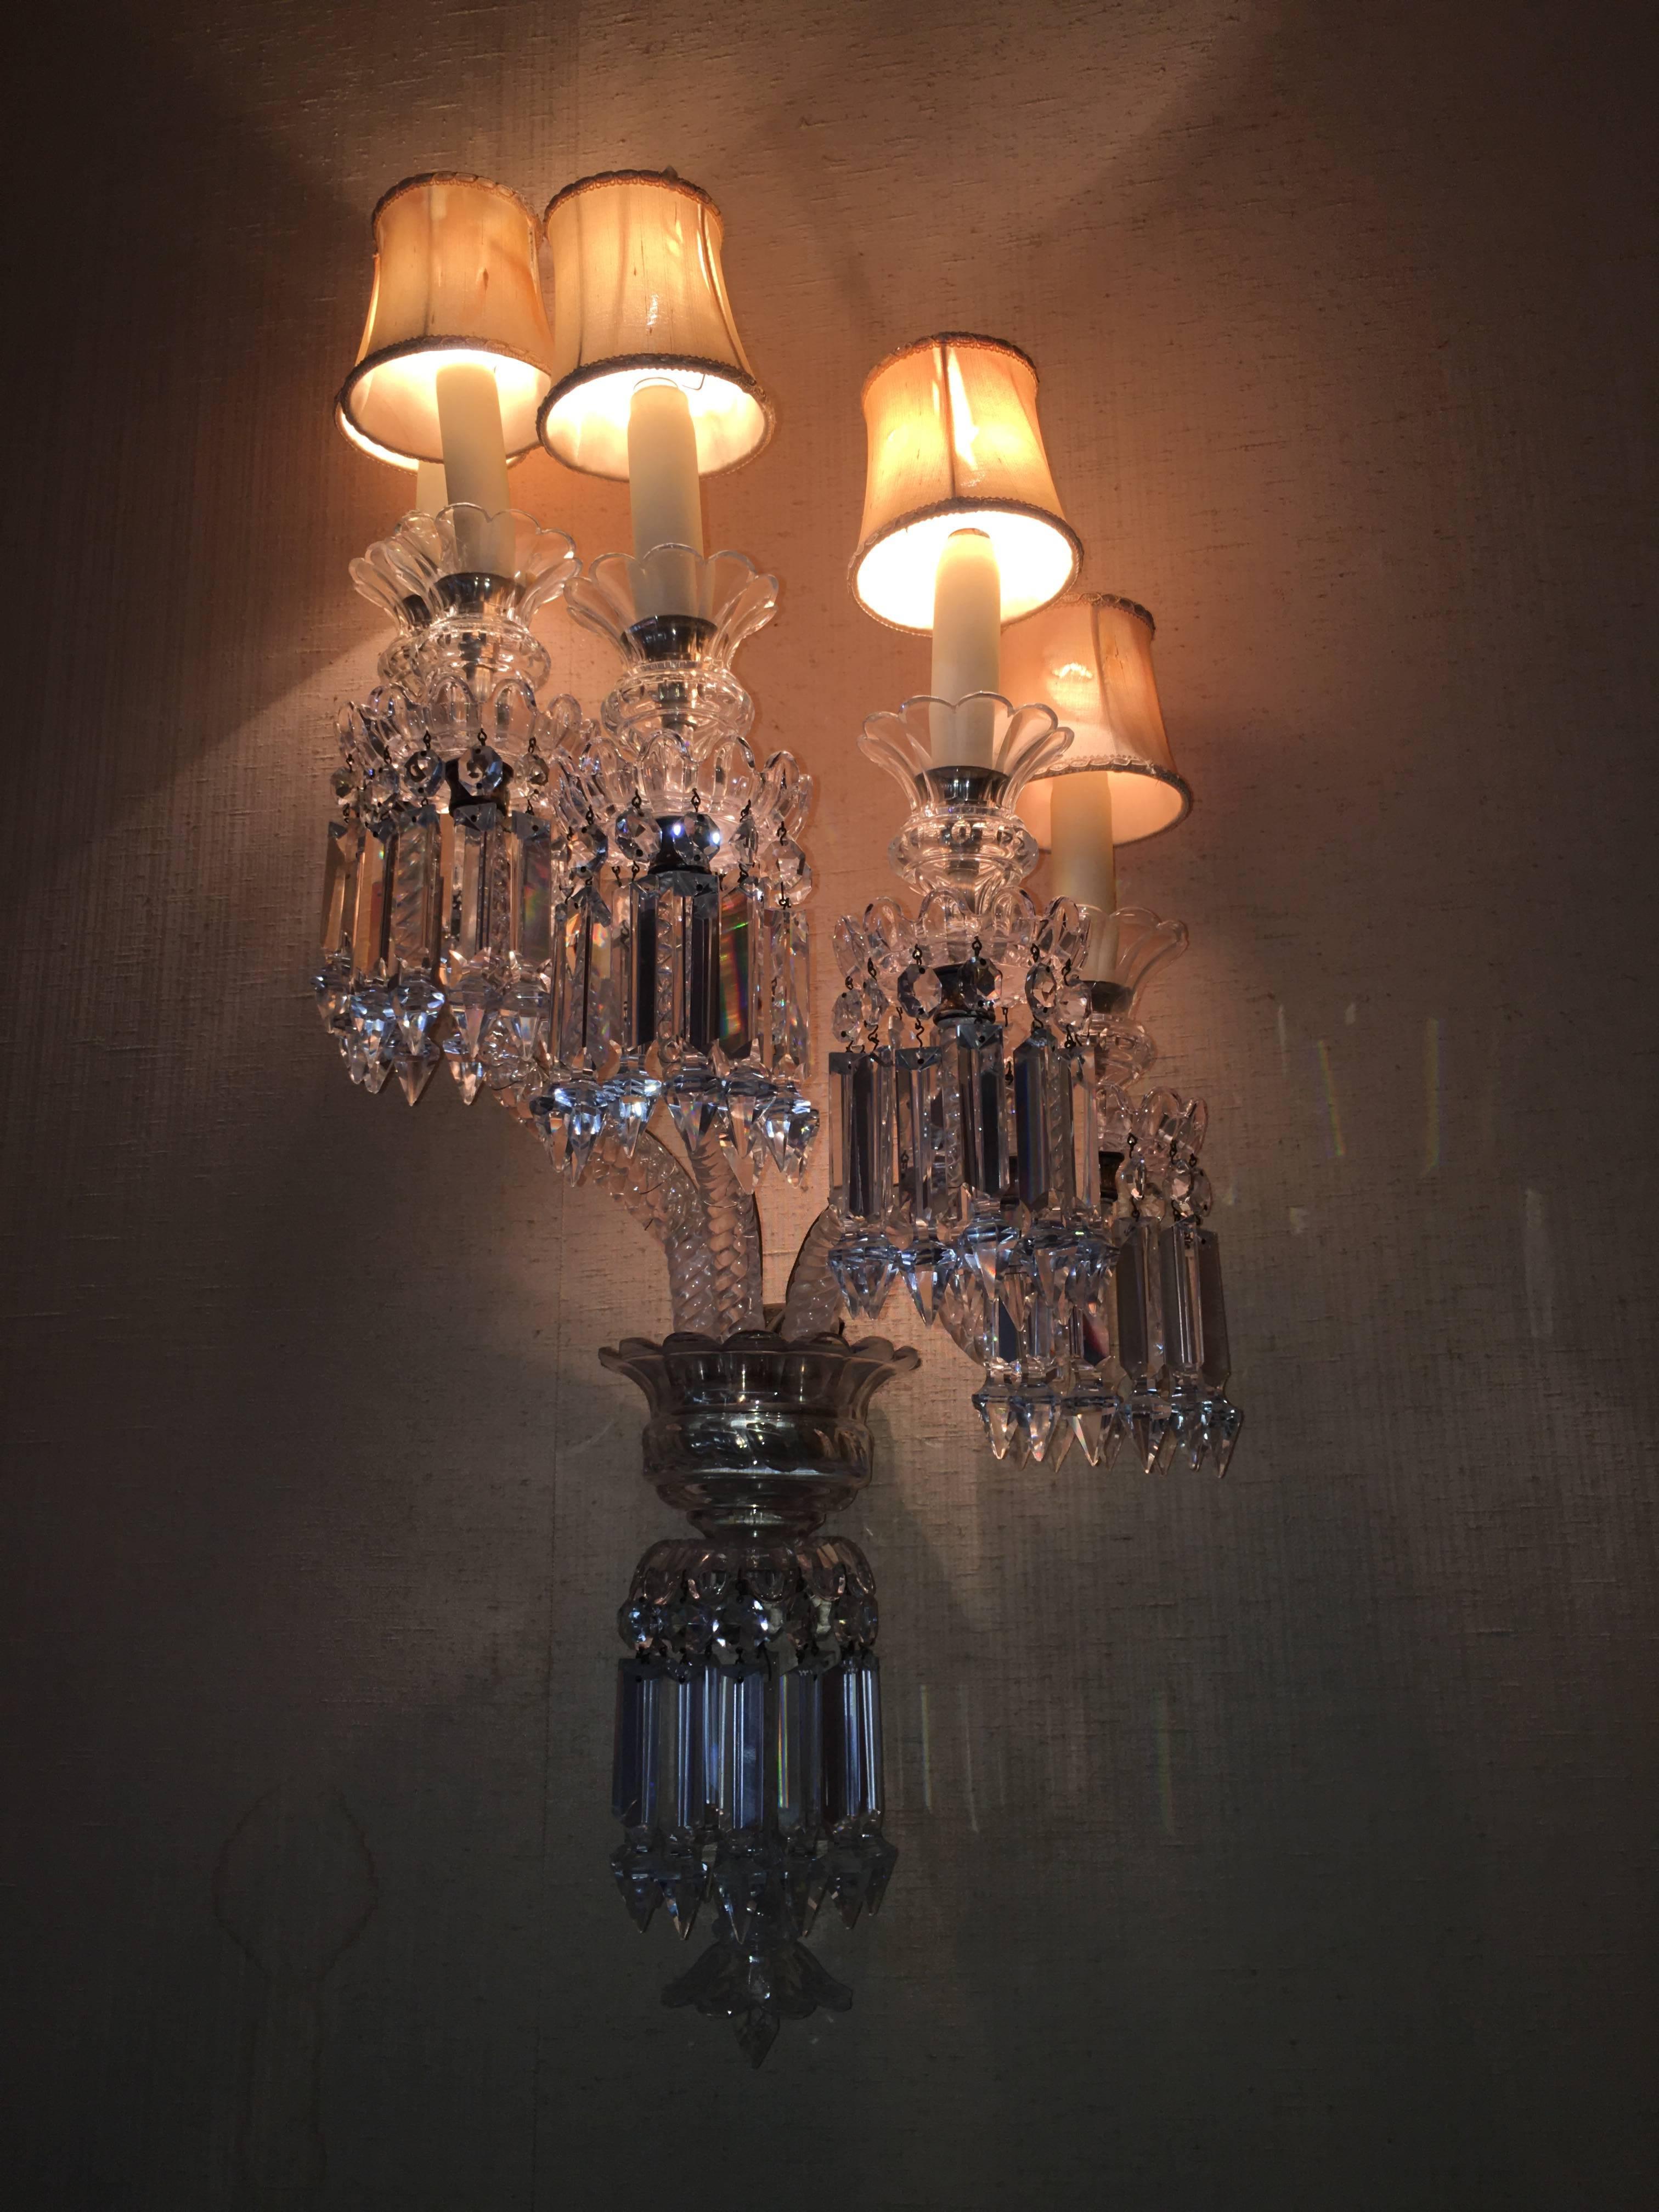 Pair of elegant sconces each with five candleholders.